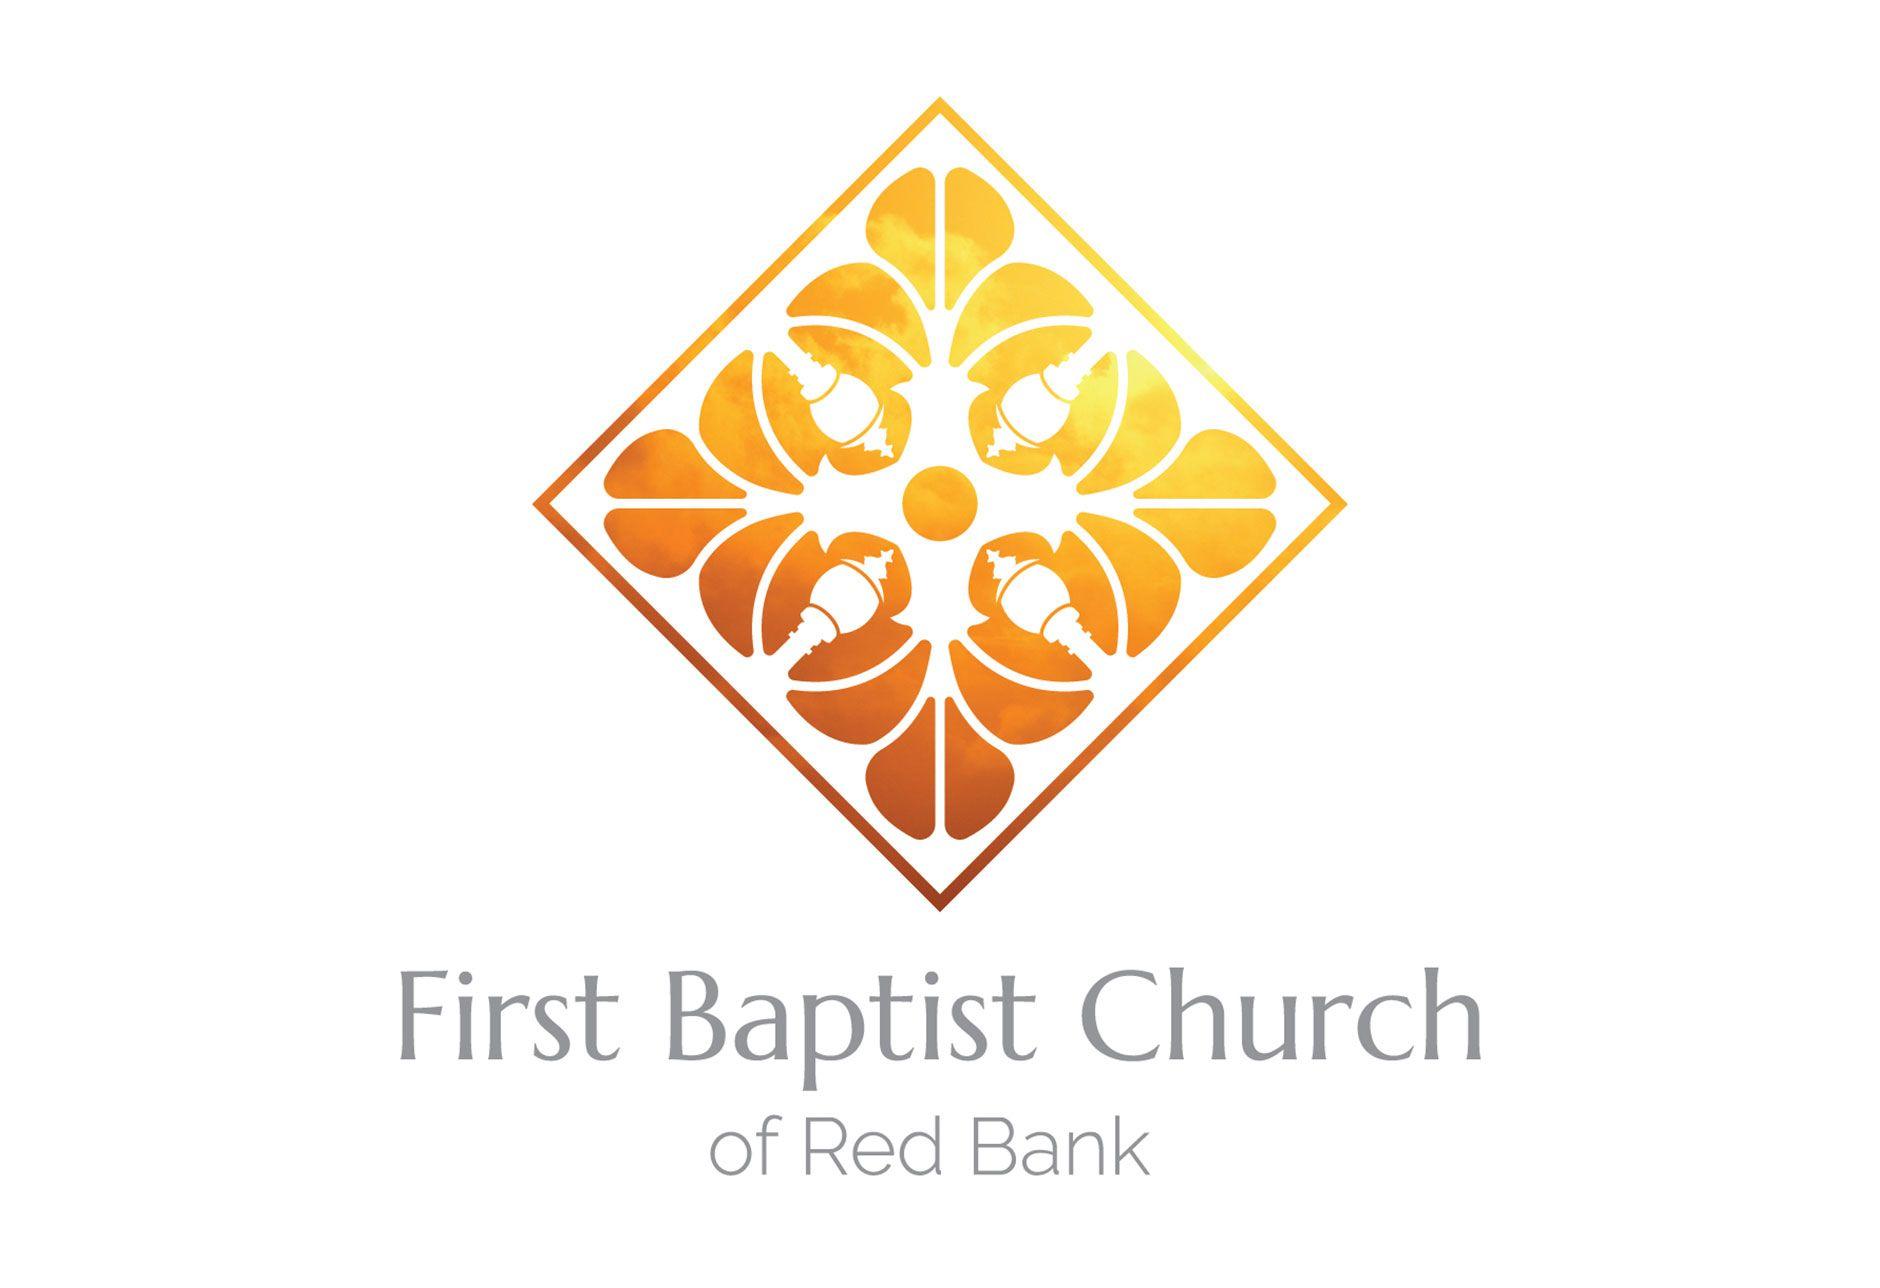 Red Bank Logo - First Baptist Church of Red Bank | Corinne Karl